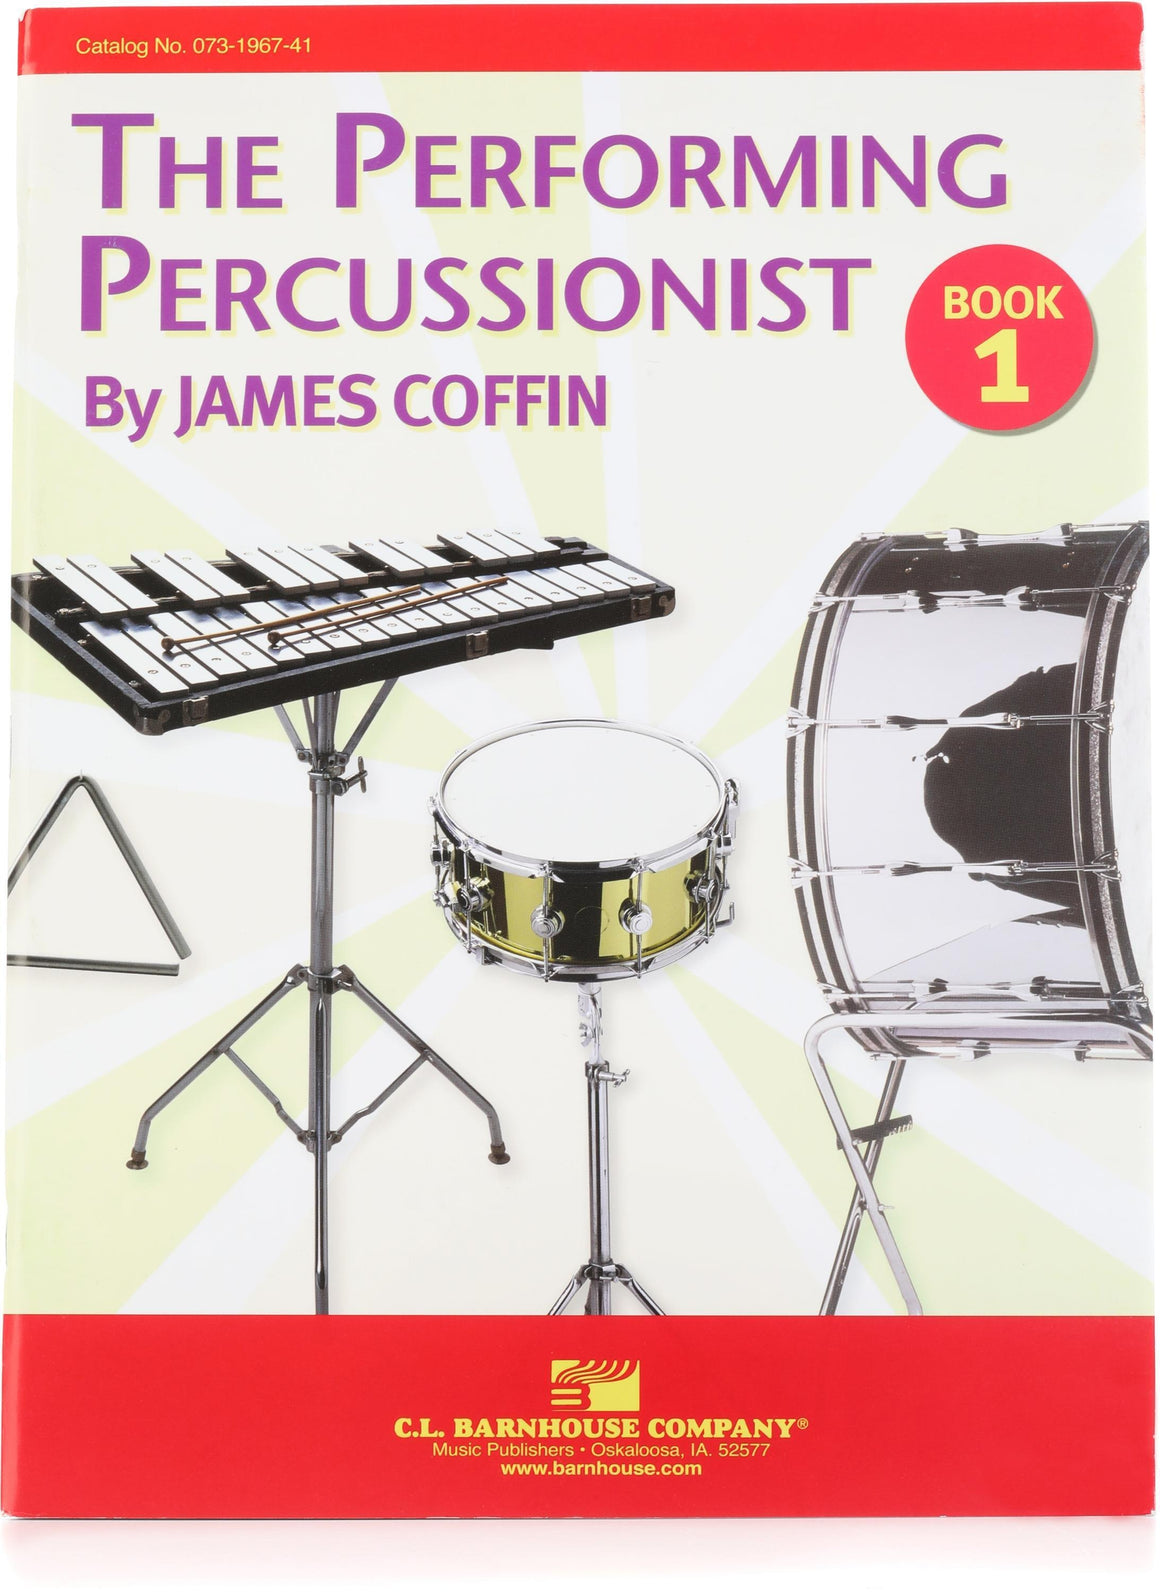 BARNHOUSE 073196741 Performing Percussionist Book 1